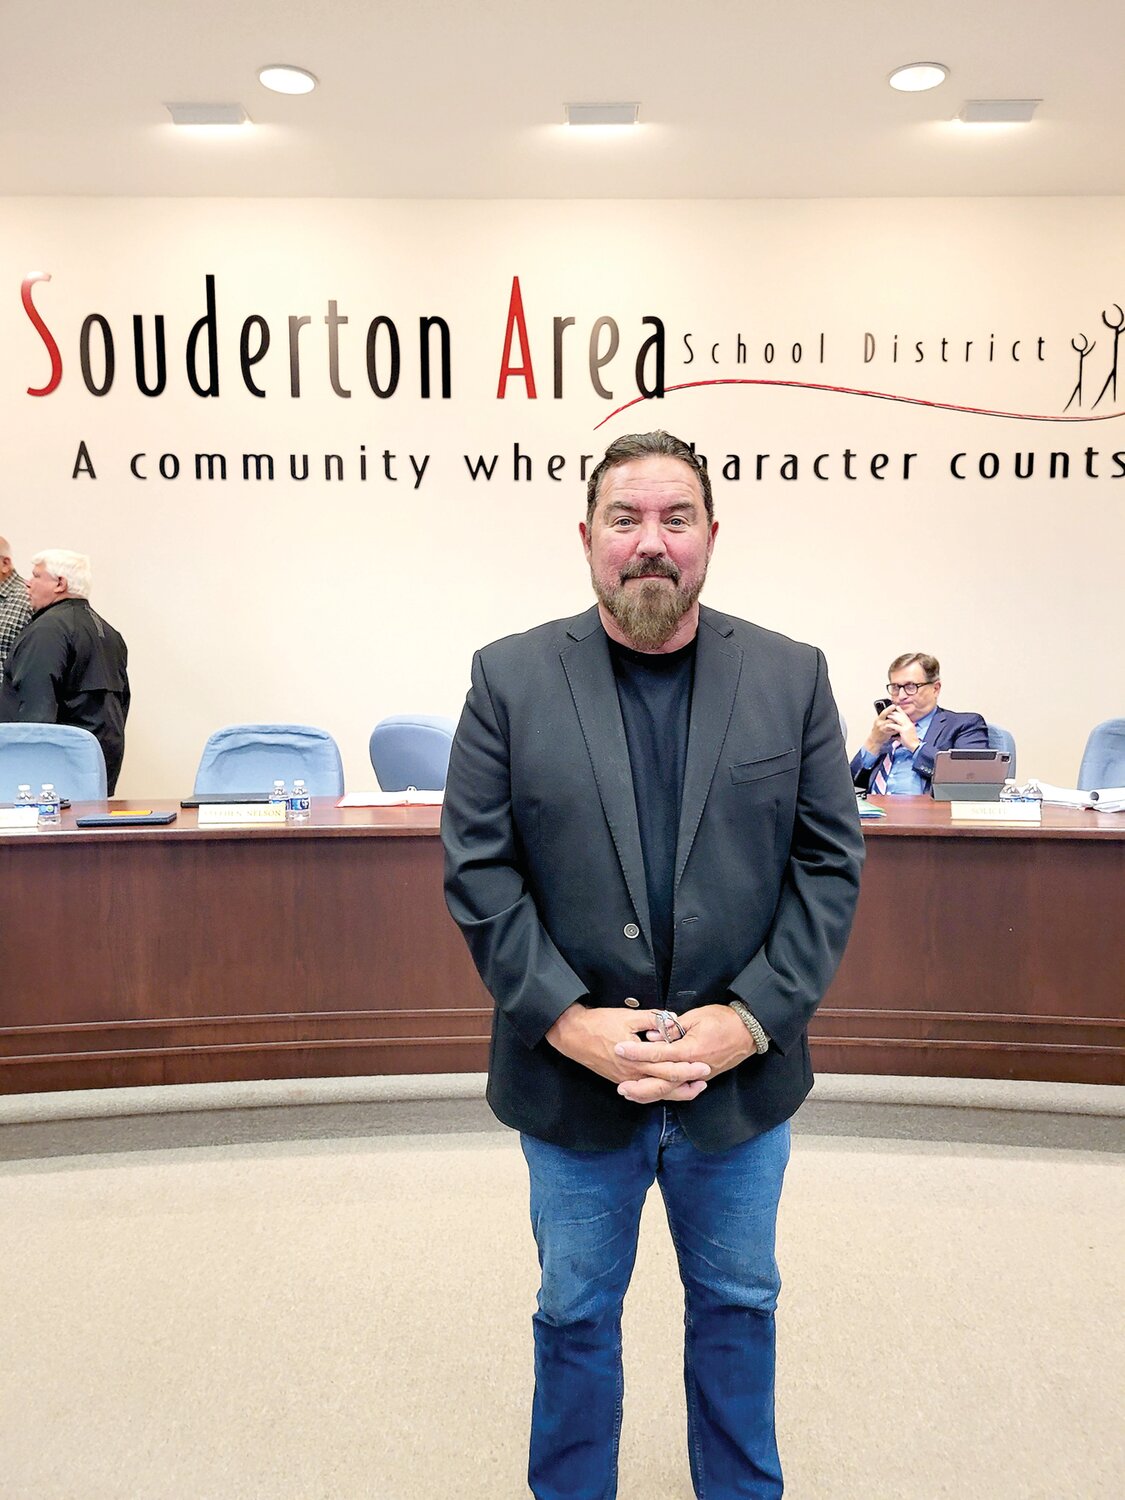 The Souderton Area School Board unanimously appointed William Formica to fill the vacant seat left by the resignation of Donna Scheuren.